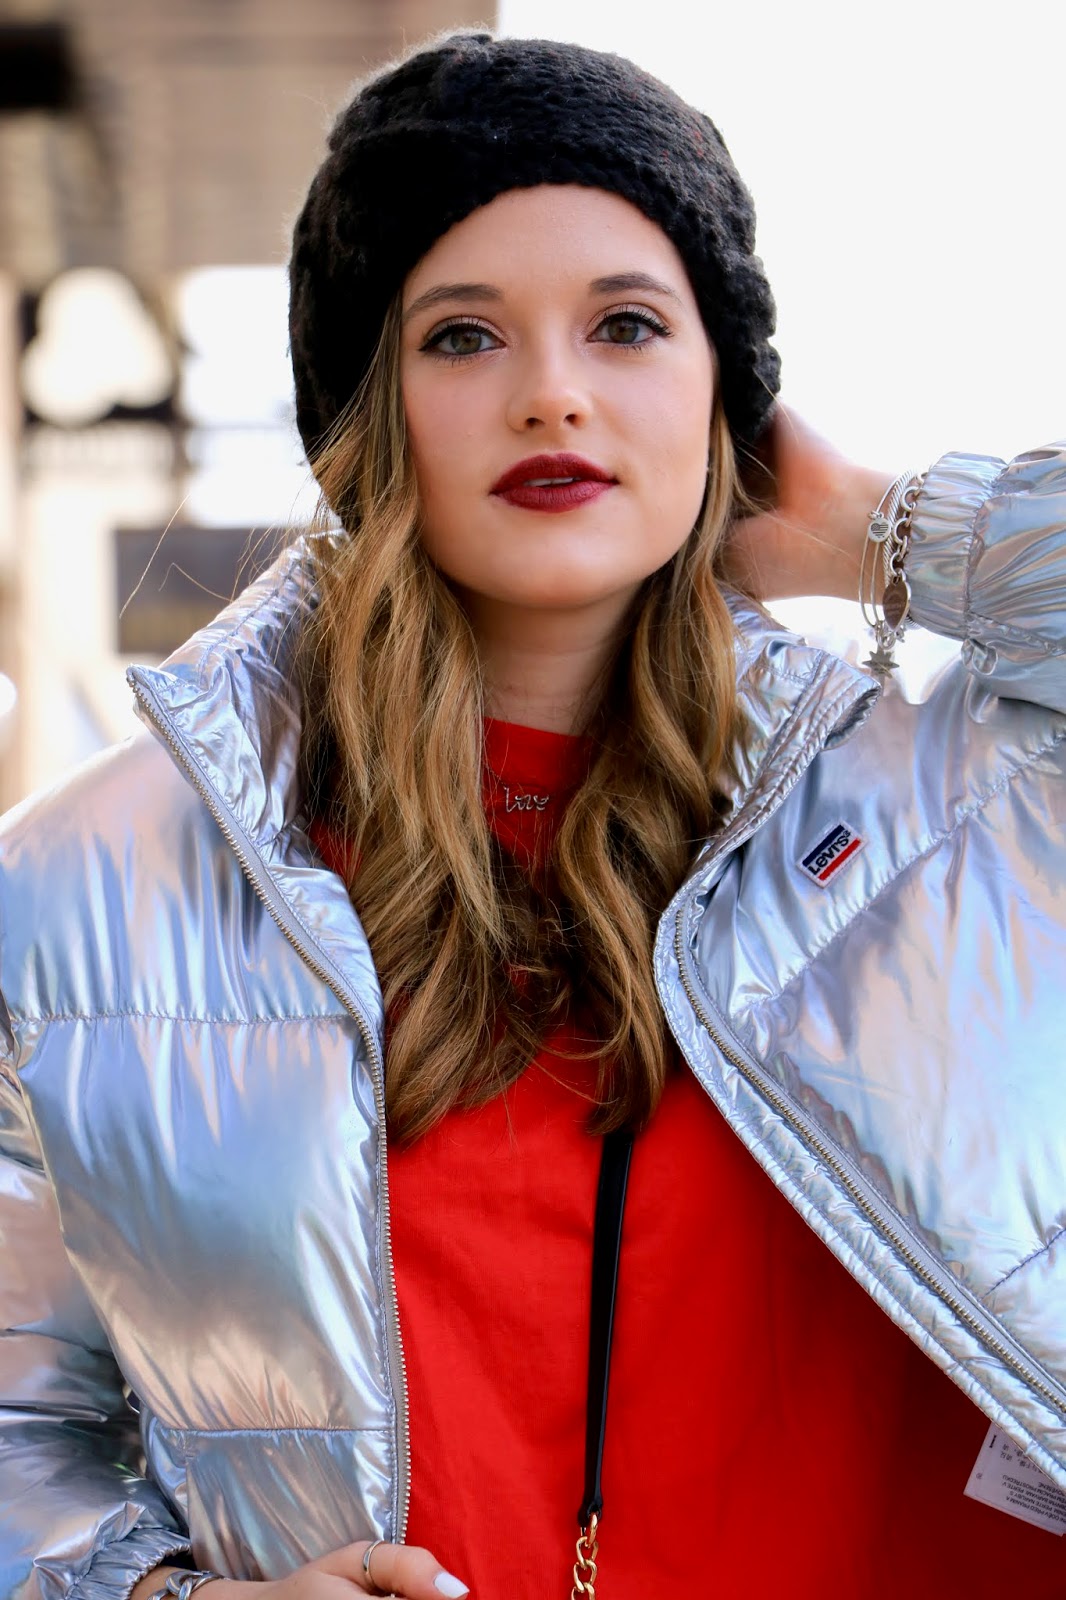 Nyc fashion blogger Kathleen Harper's winter beauty look with a red lip